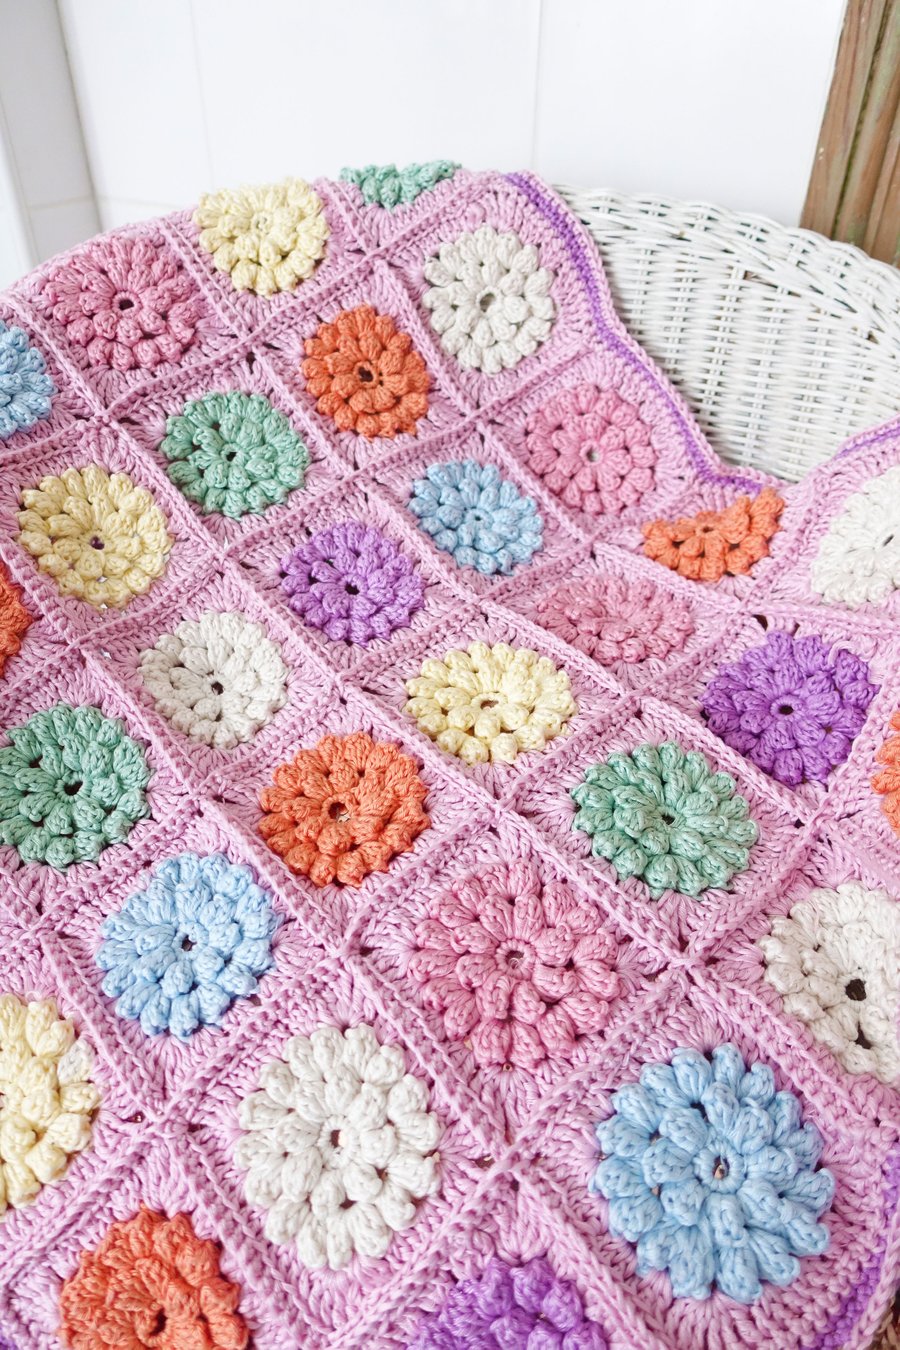 Crochet Cotton Baby Blanket - Supersoft yarn, washable.  Throws.  Leg Warmers.